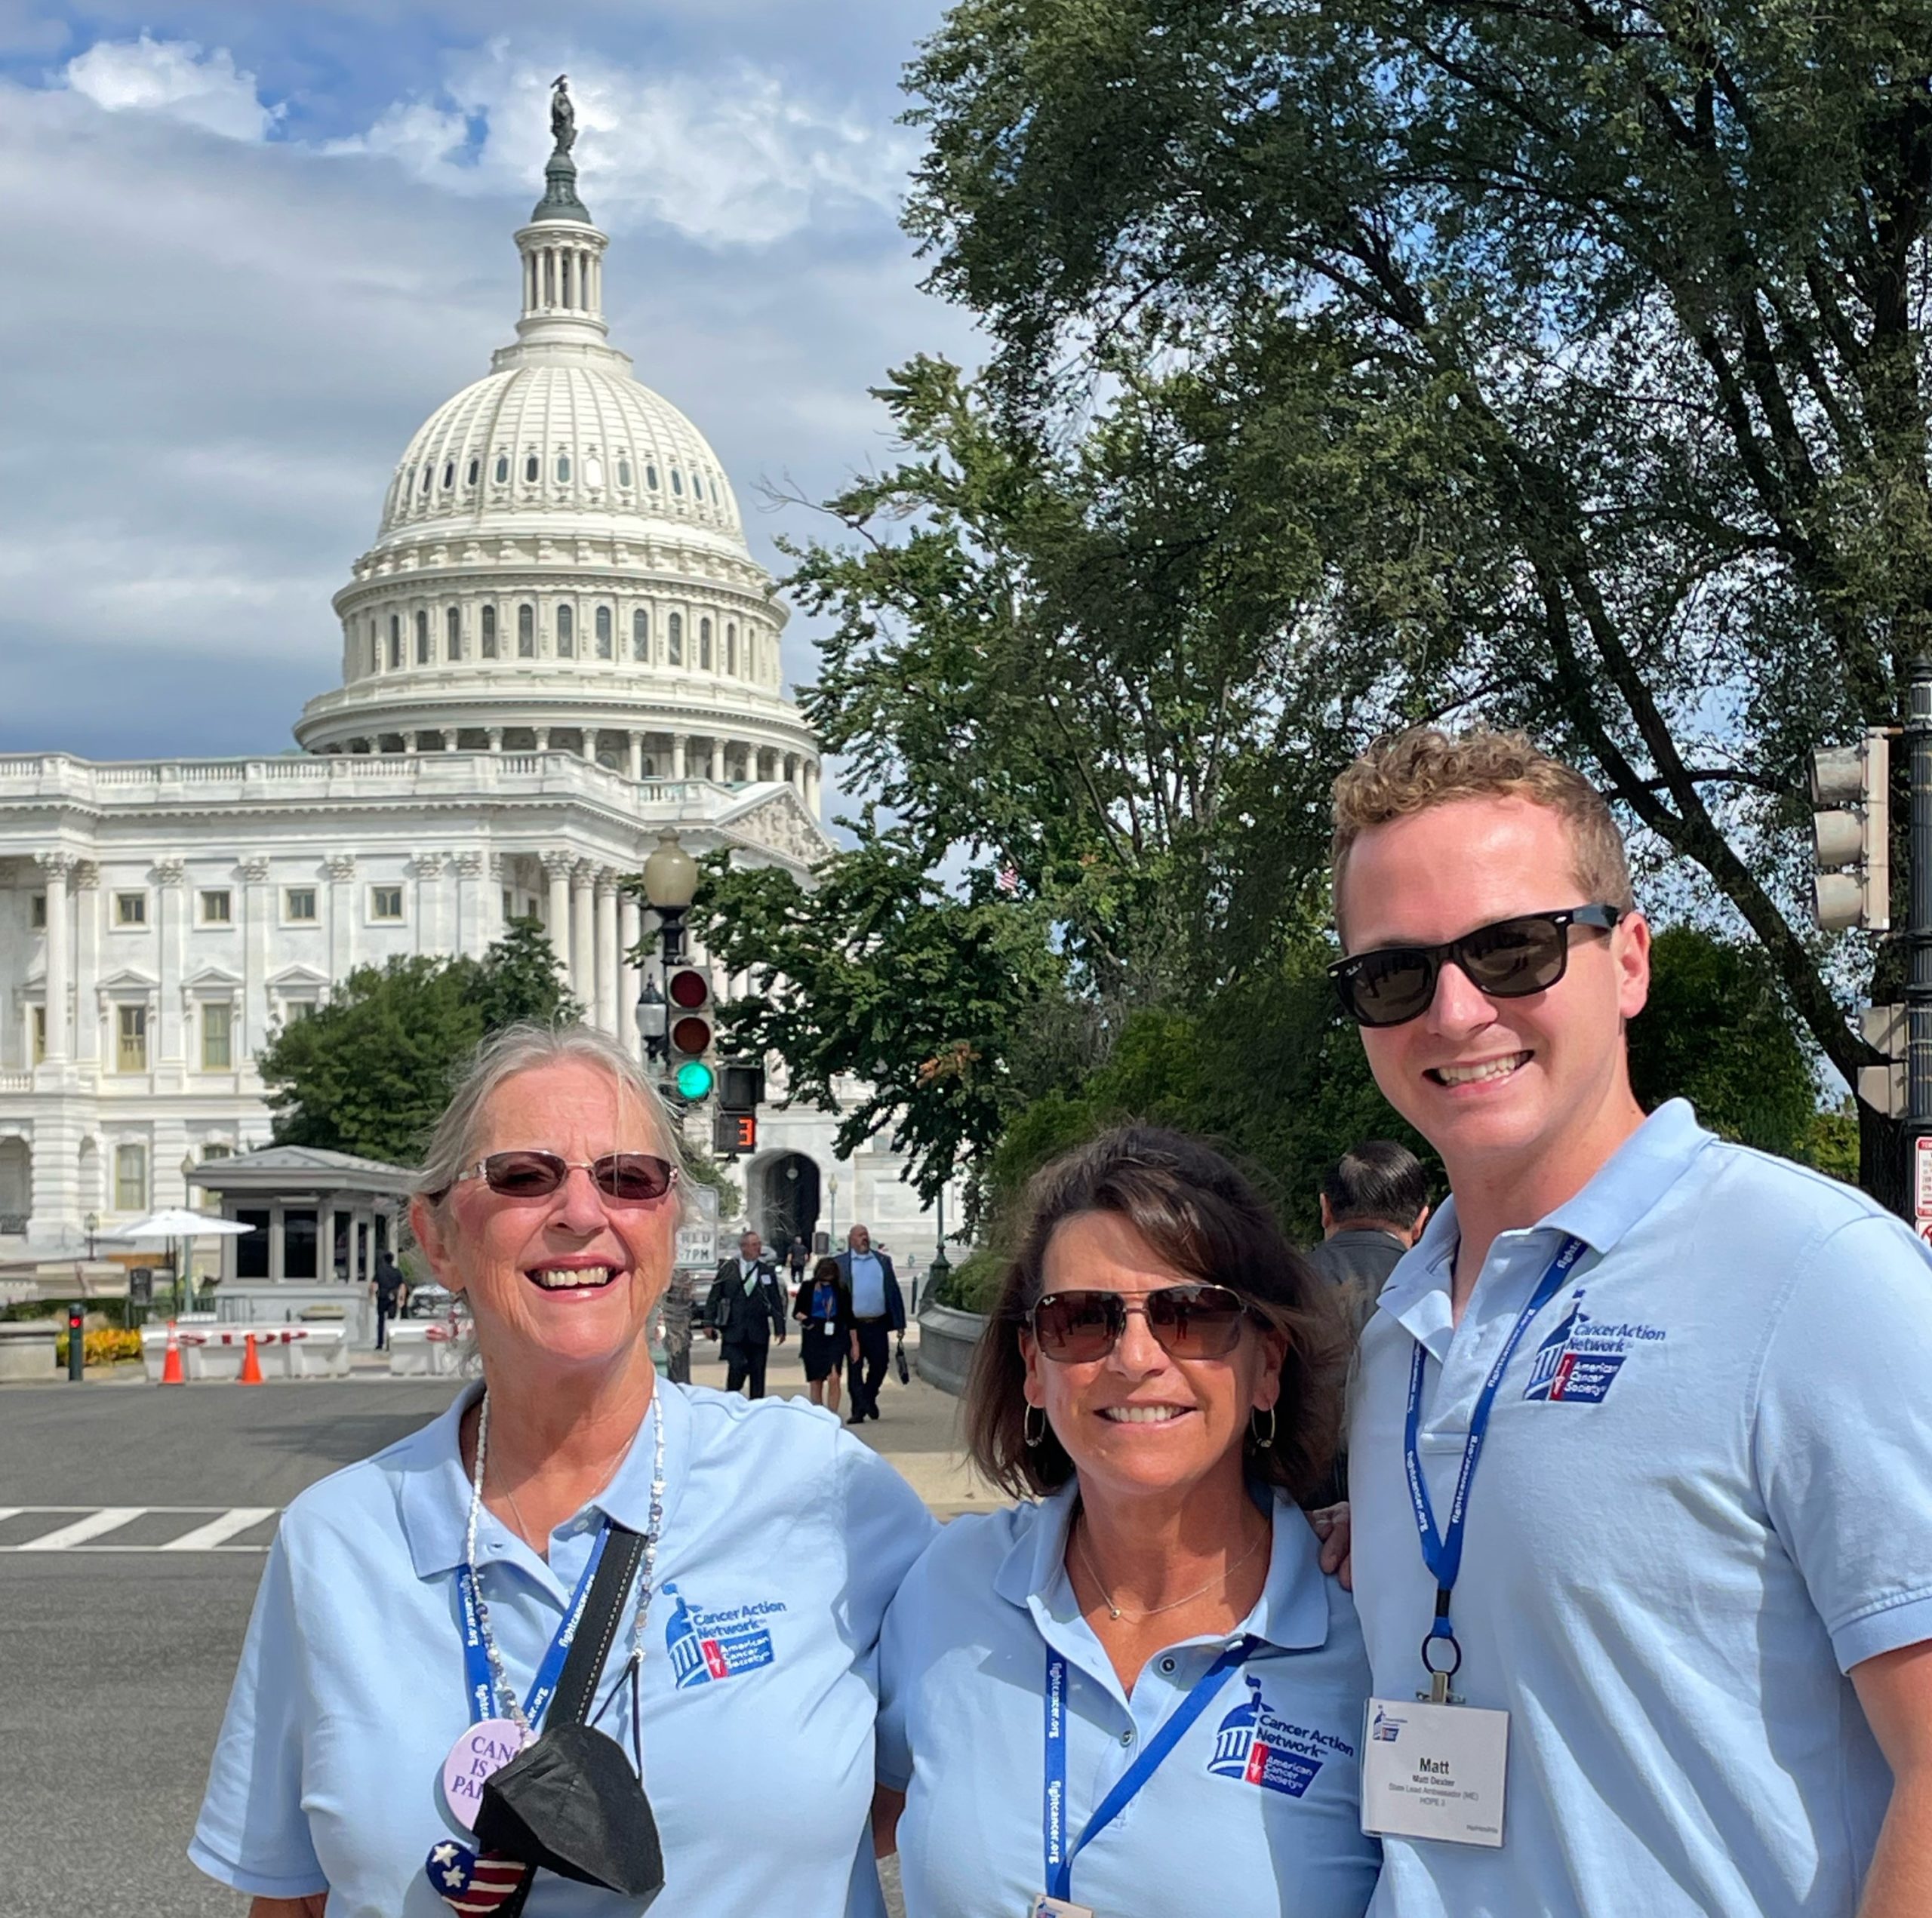 A group of three individuals, two women and a man, stand on a sidewalk with the U.S. Capitol building behind them.